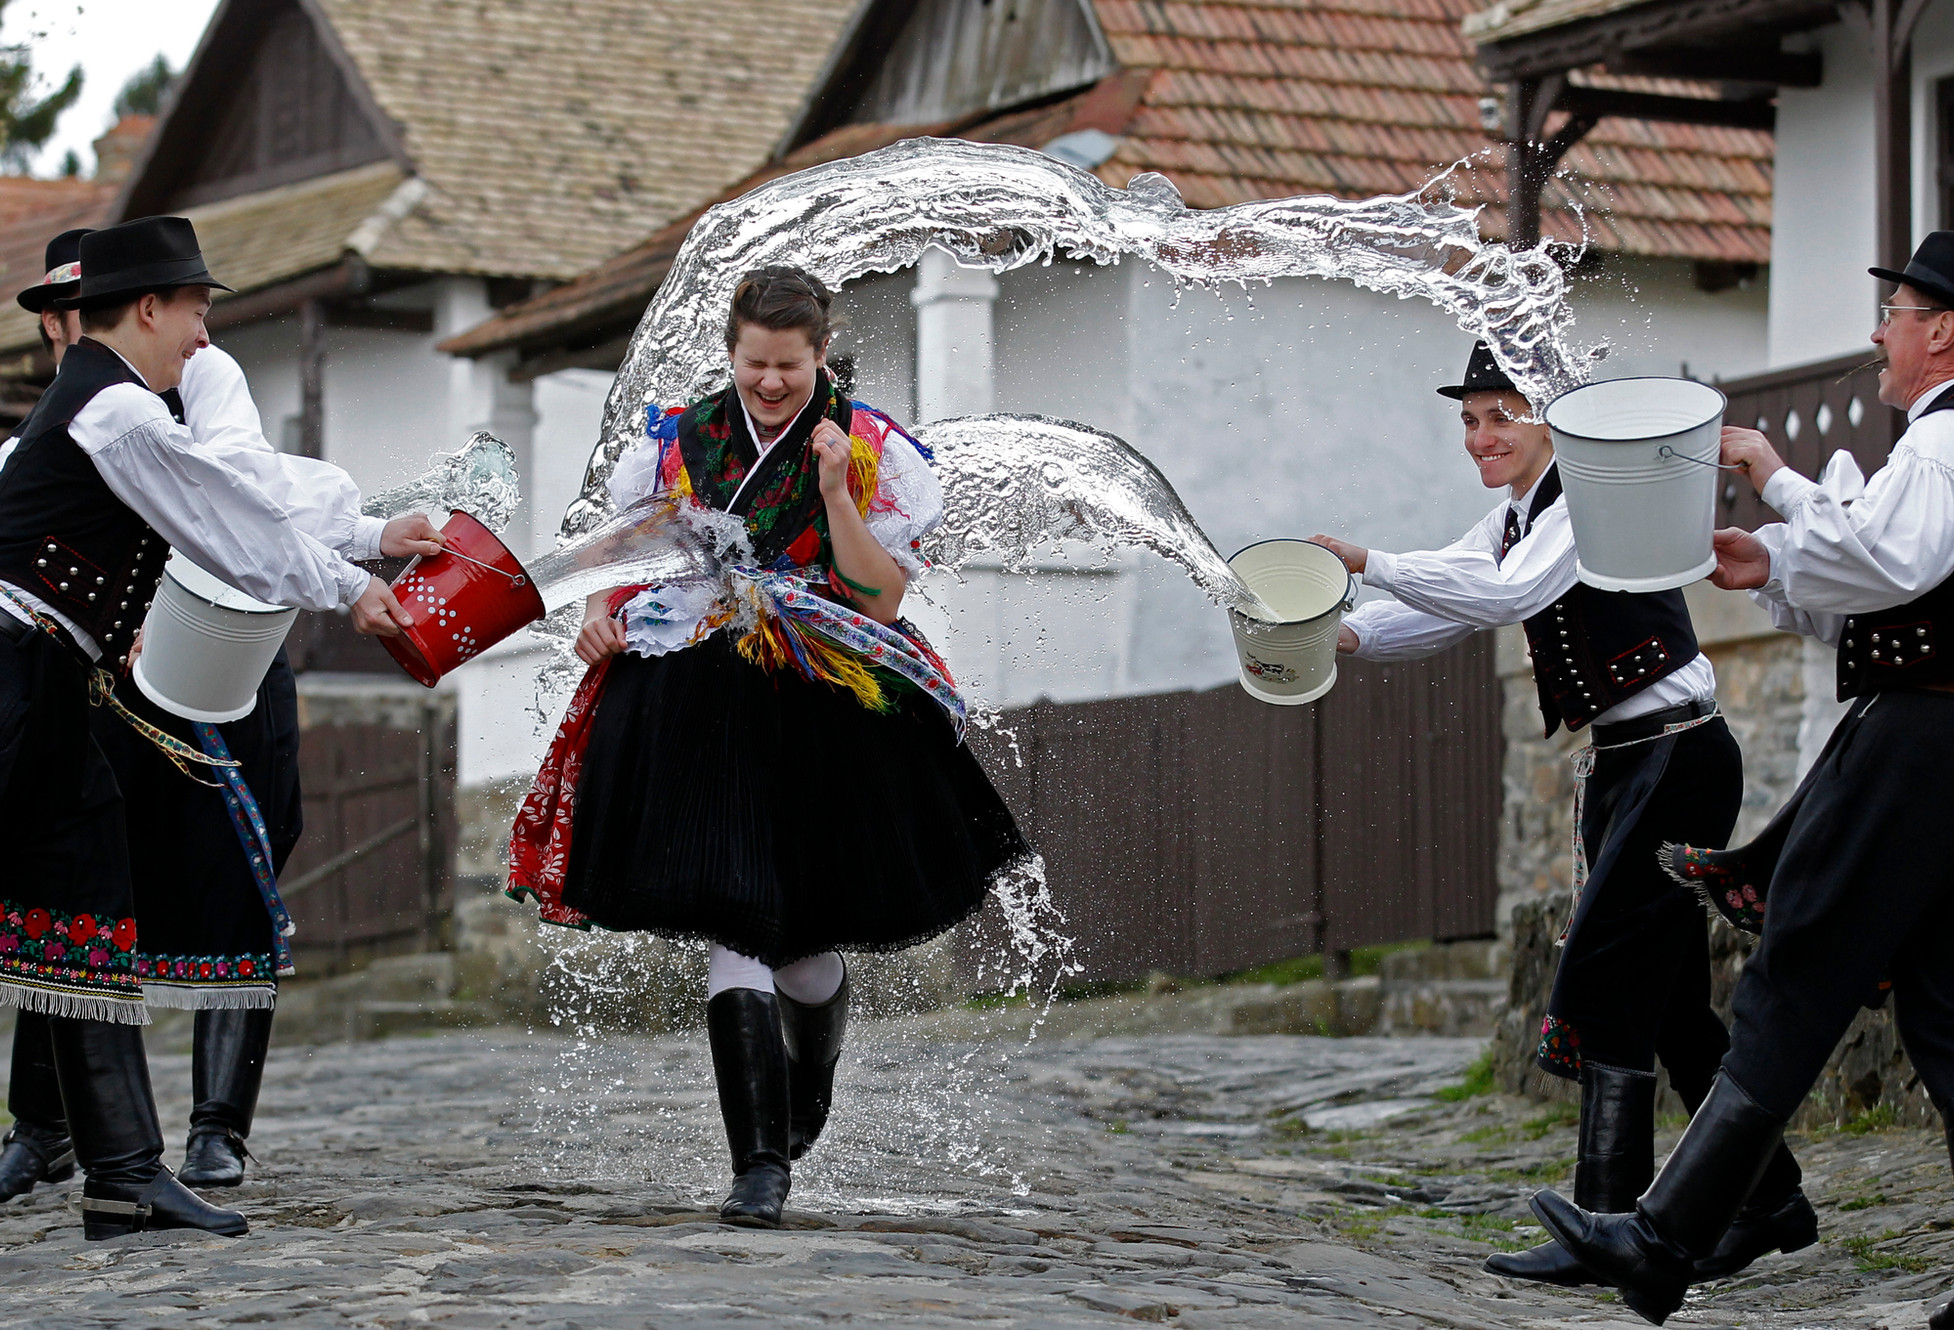 Watch: What Happened This Easter in Hollókő, Hungary